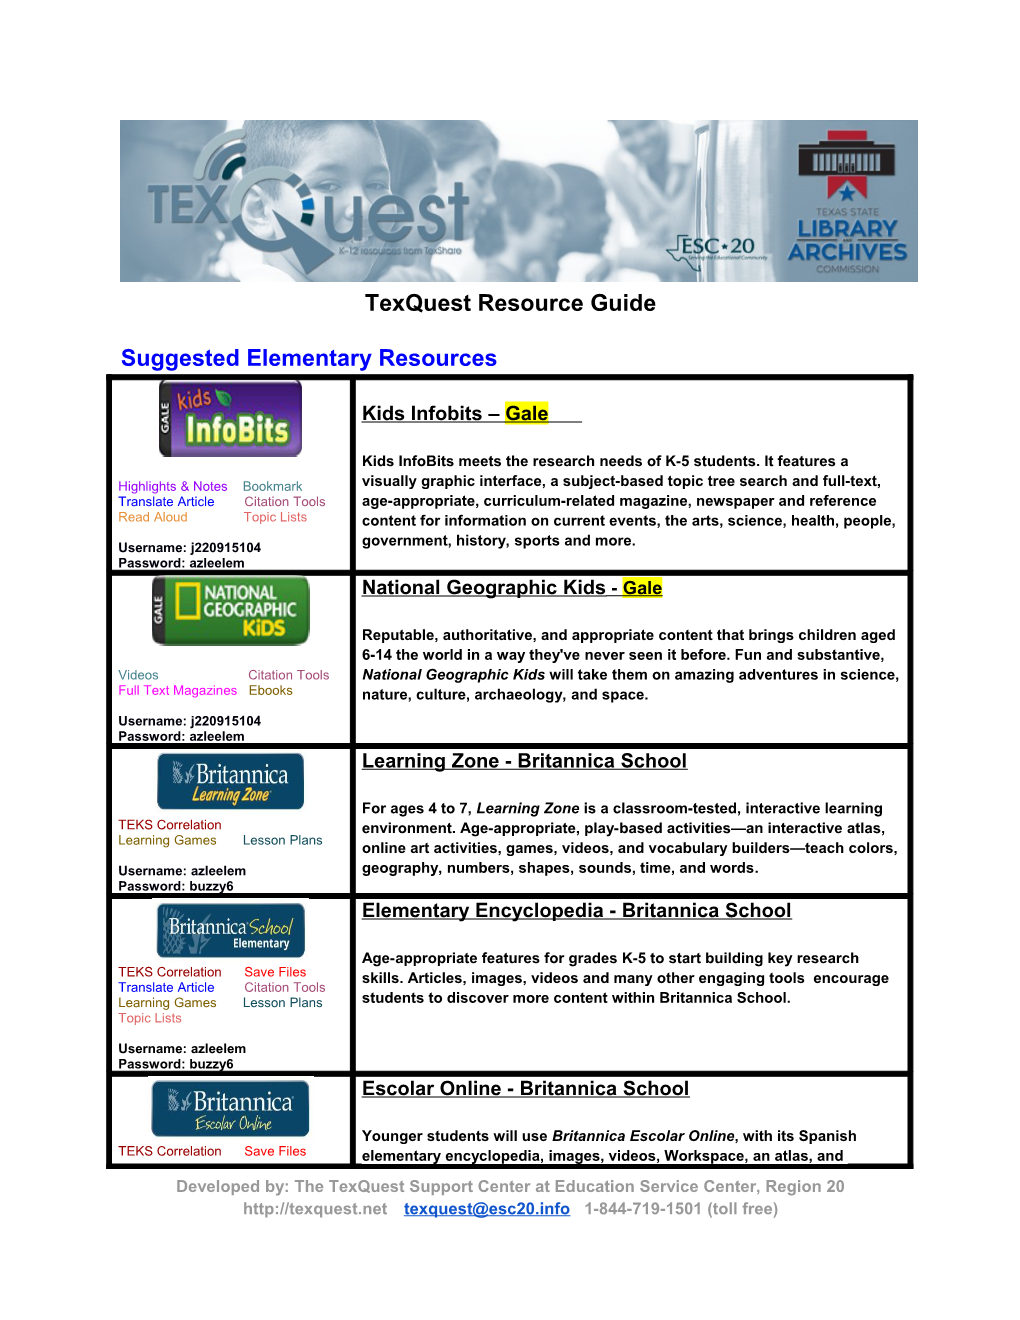 Suggested Elementary Resources